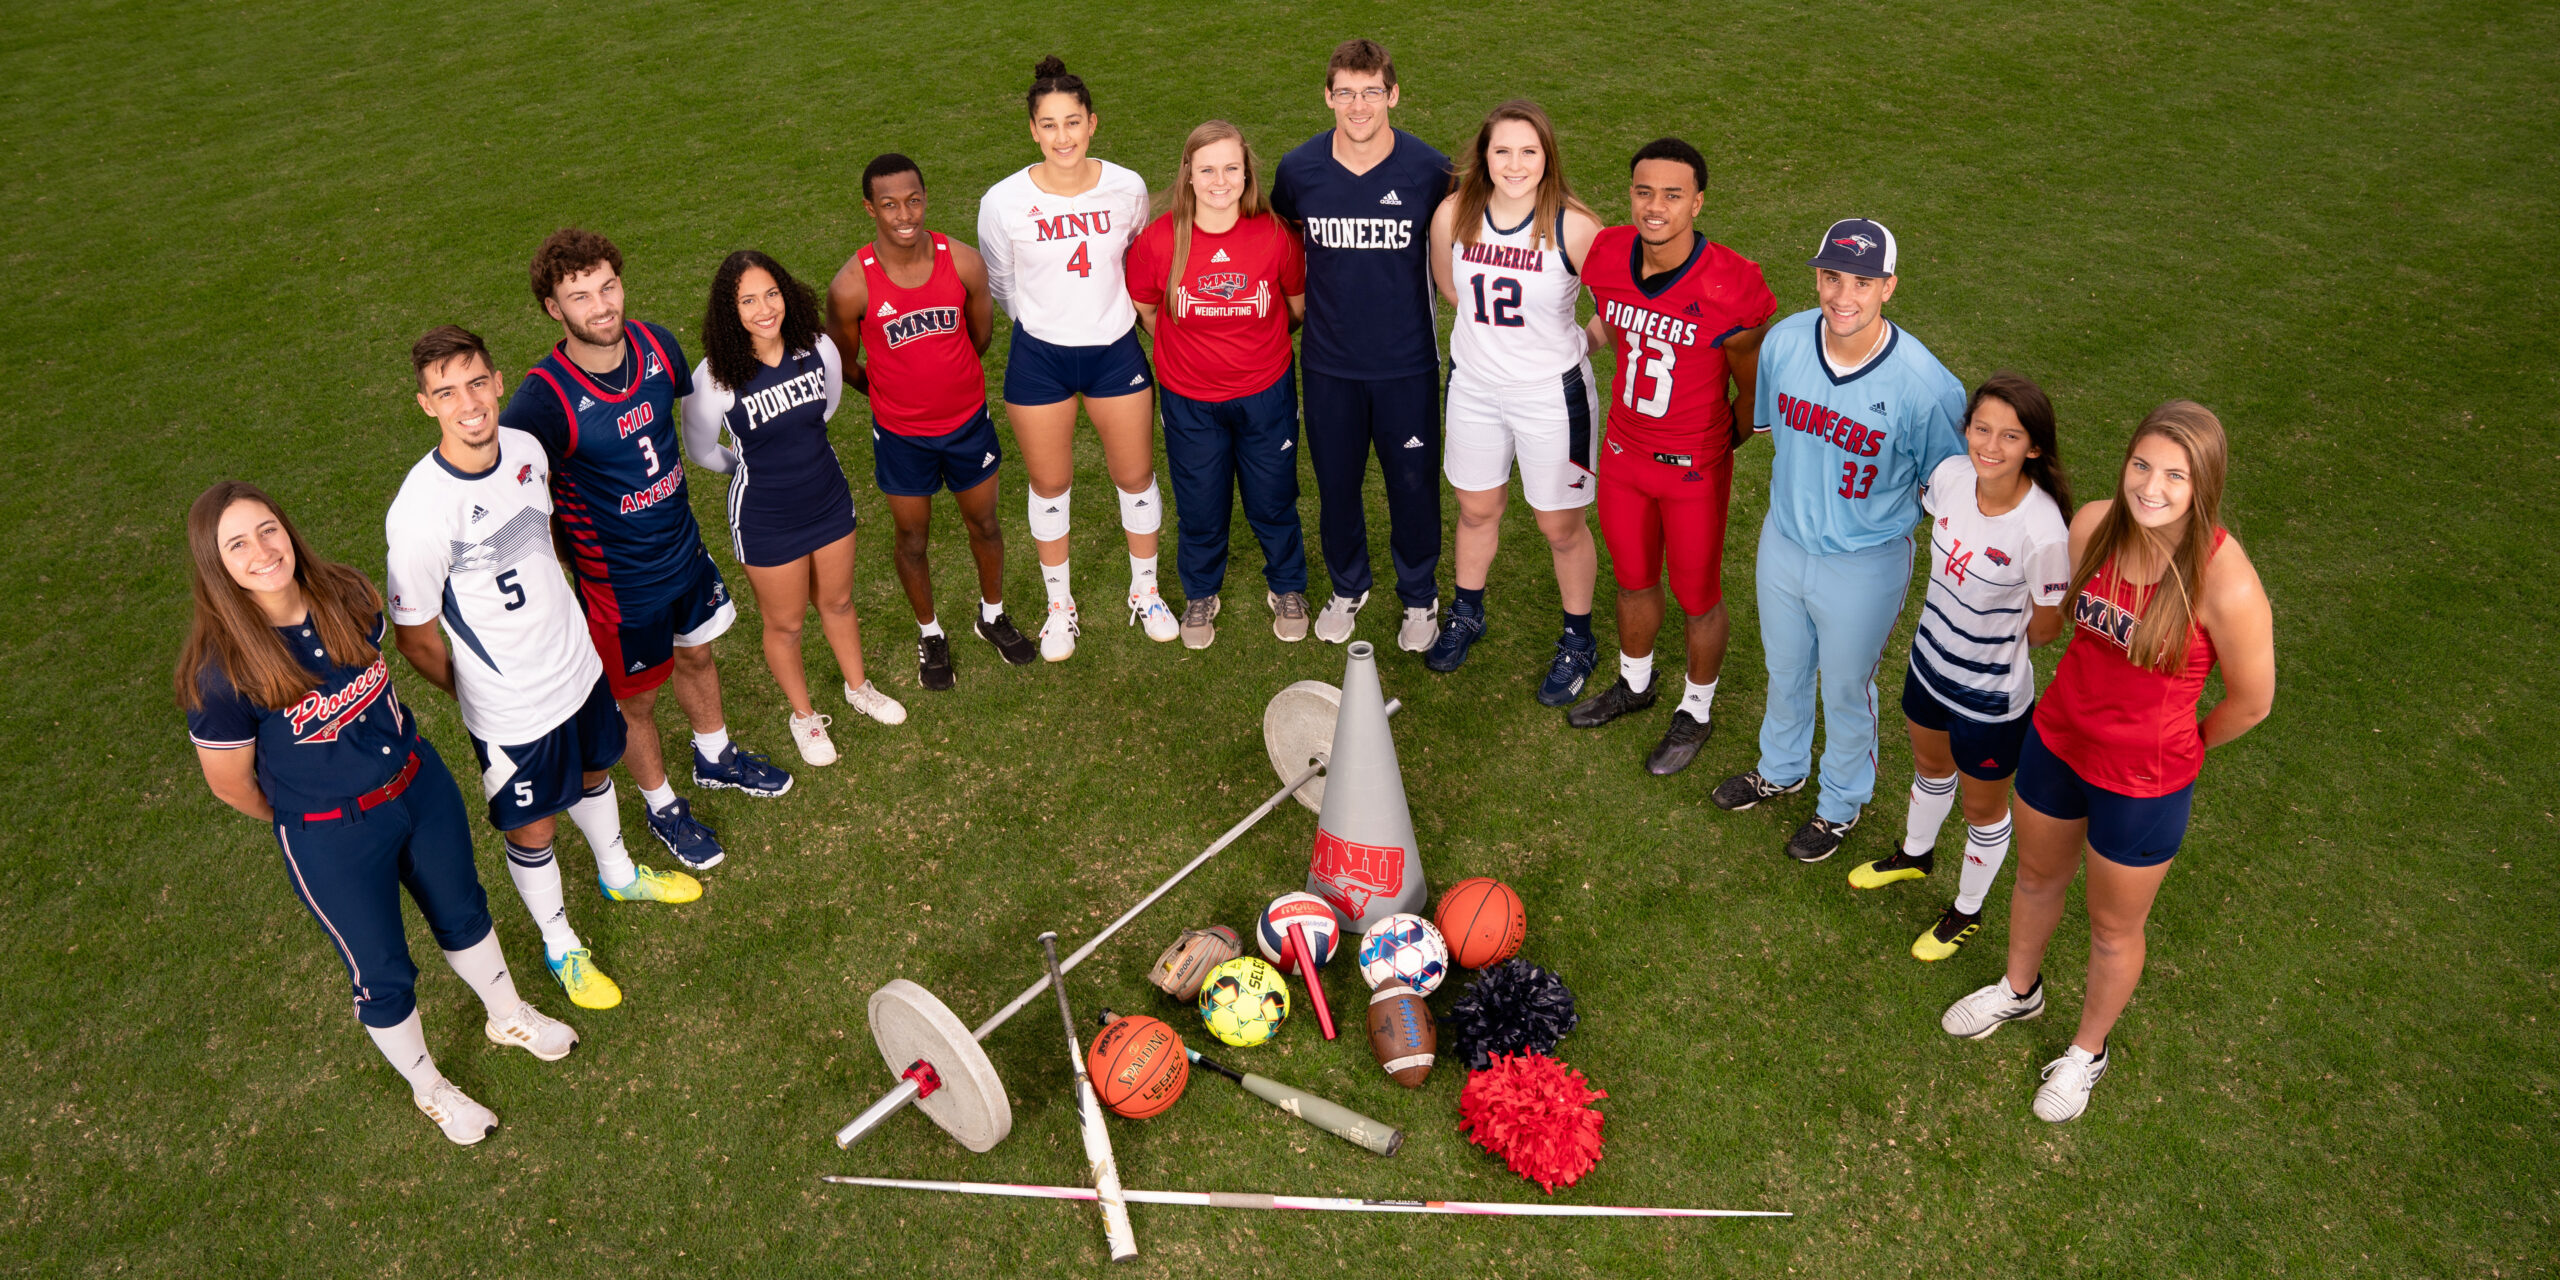 Athletes from all MNU sports